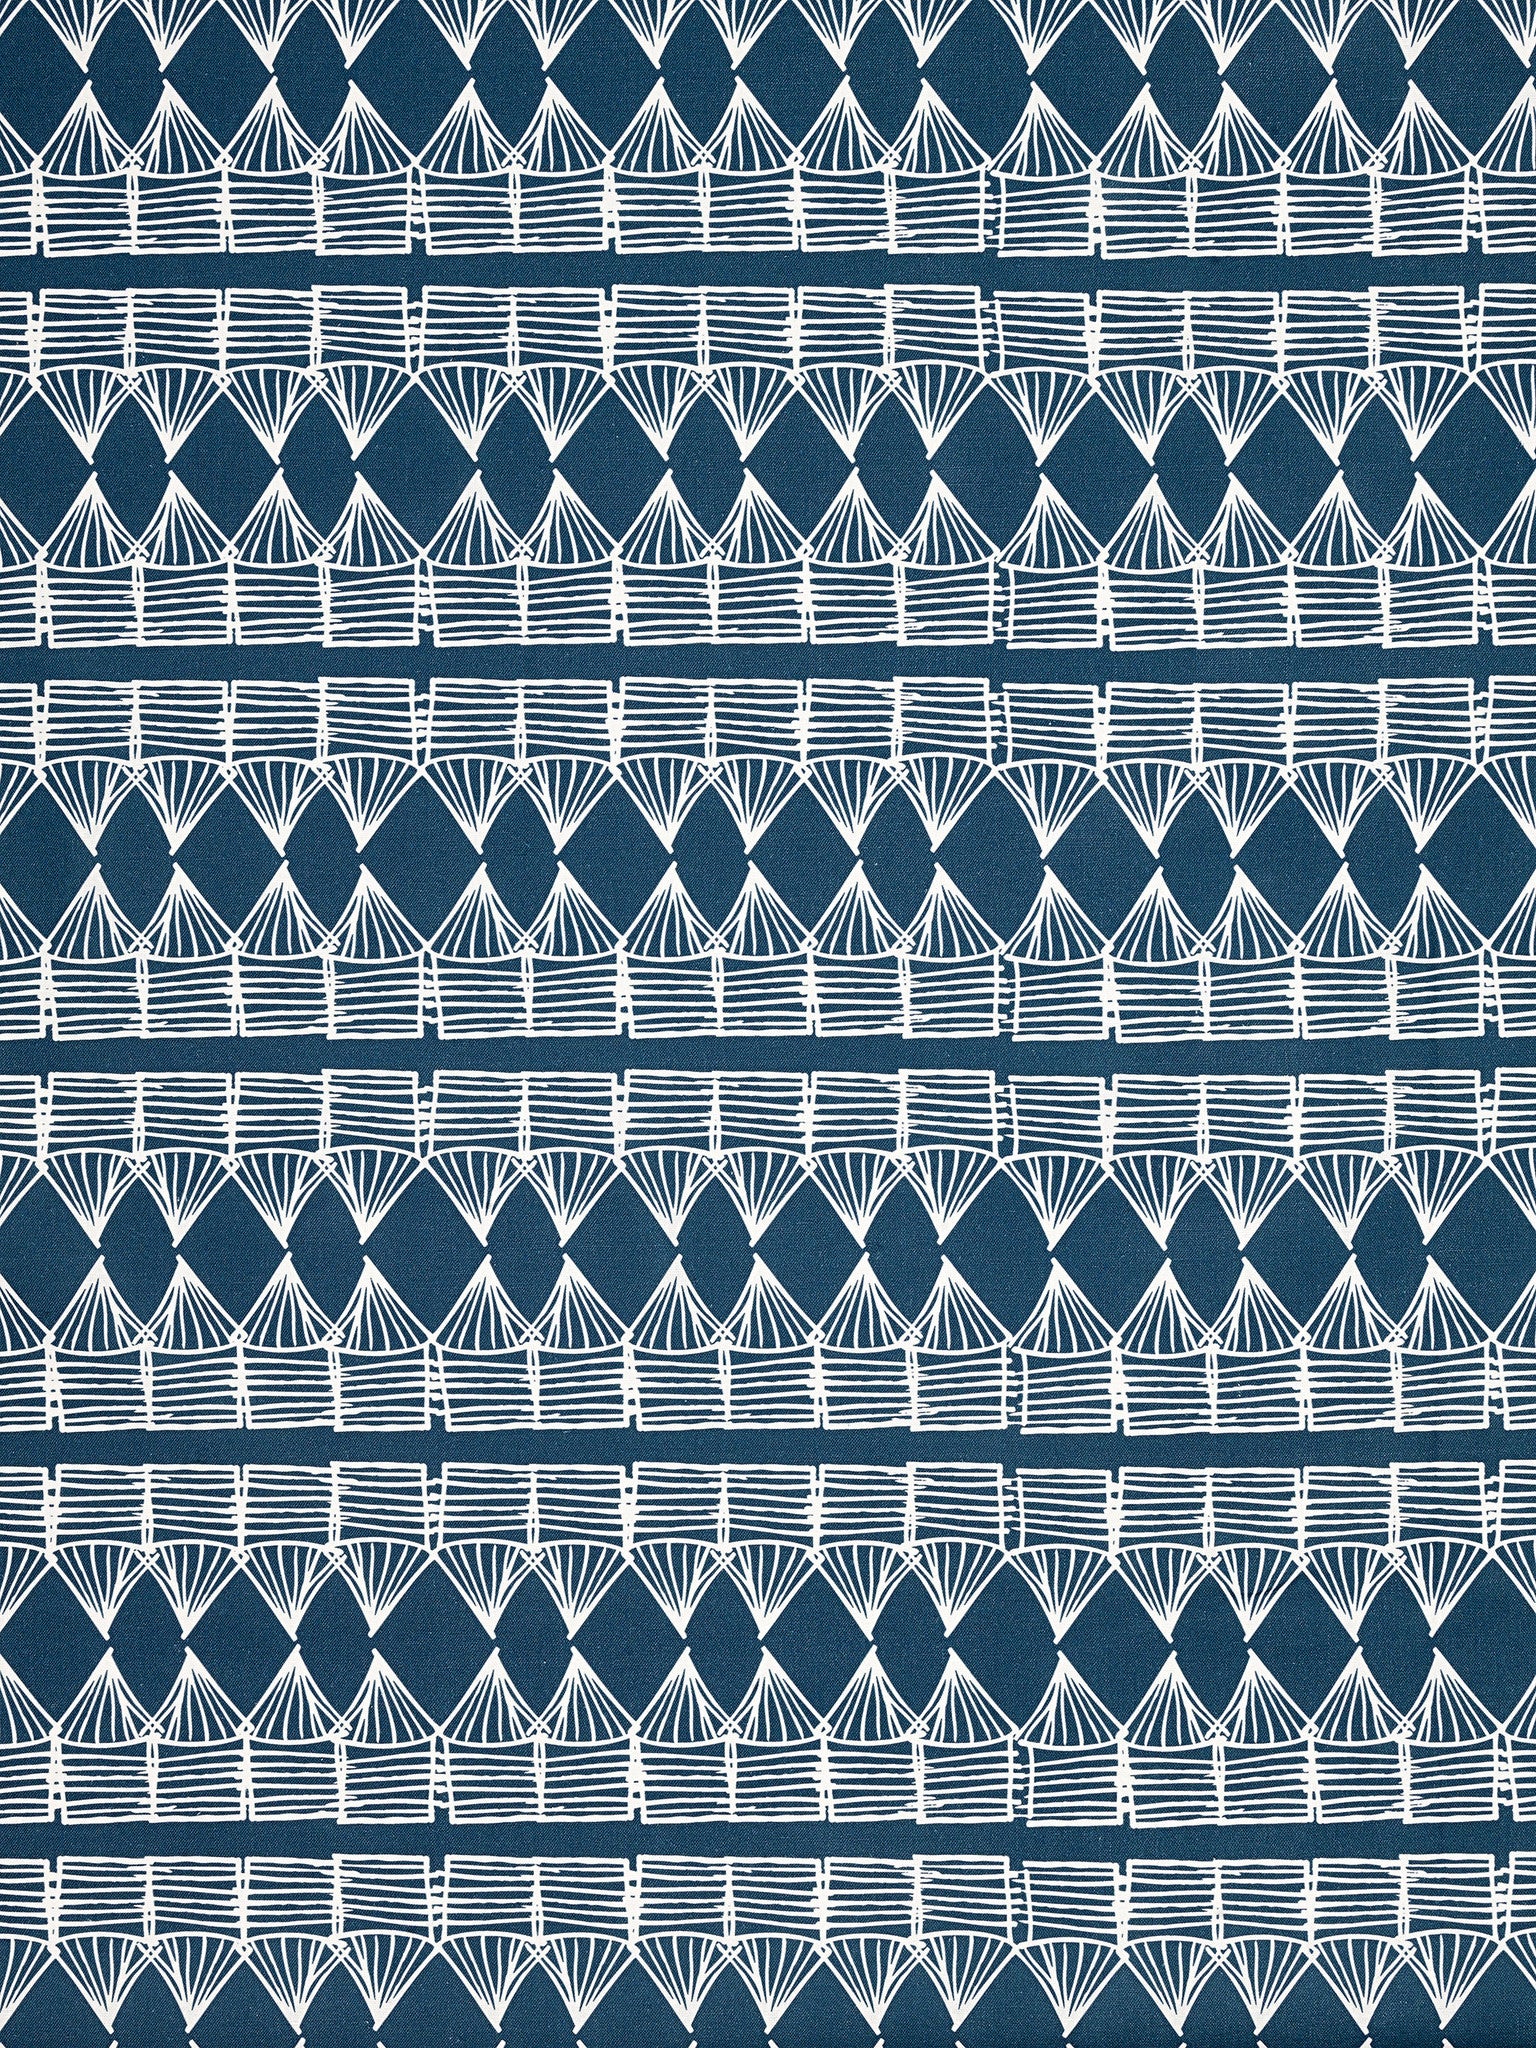 Tiki Huts Pattern Cotton Linen Designer Home Decor Fabric by the meter or by the yard in Dark Petrol Blue (Navy) for curtains, blinds, upholstery ships from Canada worldwide including USA